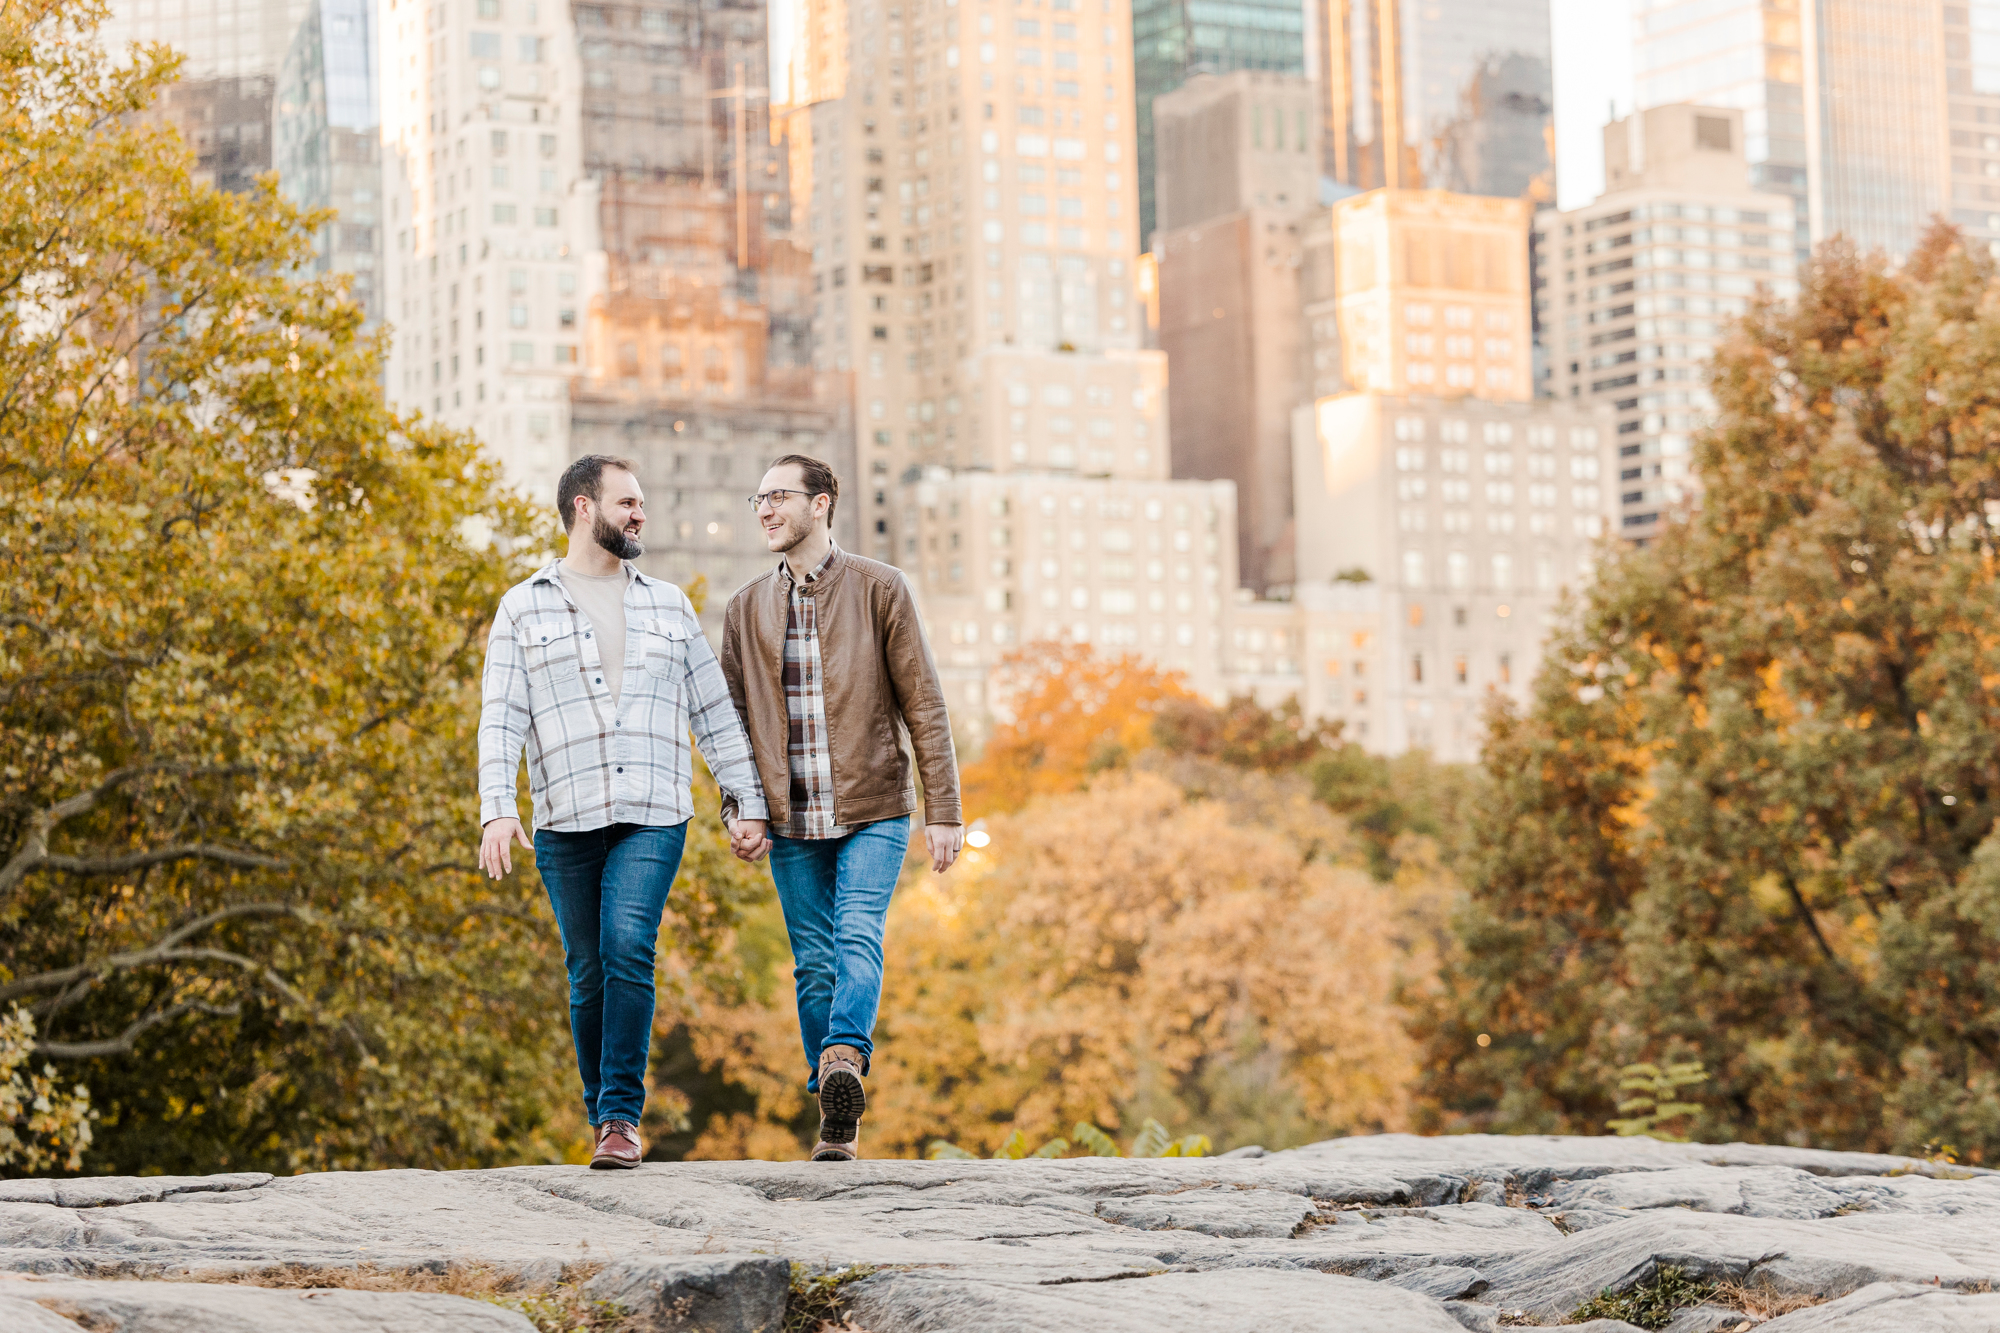 Candid Central Park Engagement Photo Shoot in Fall